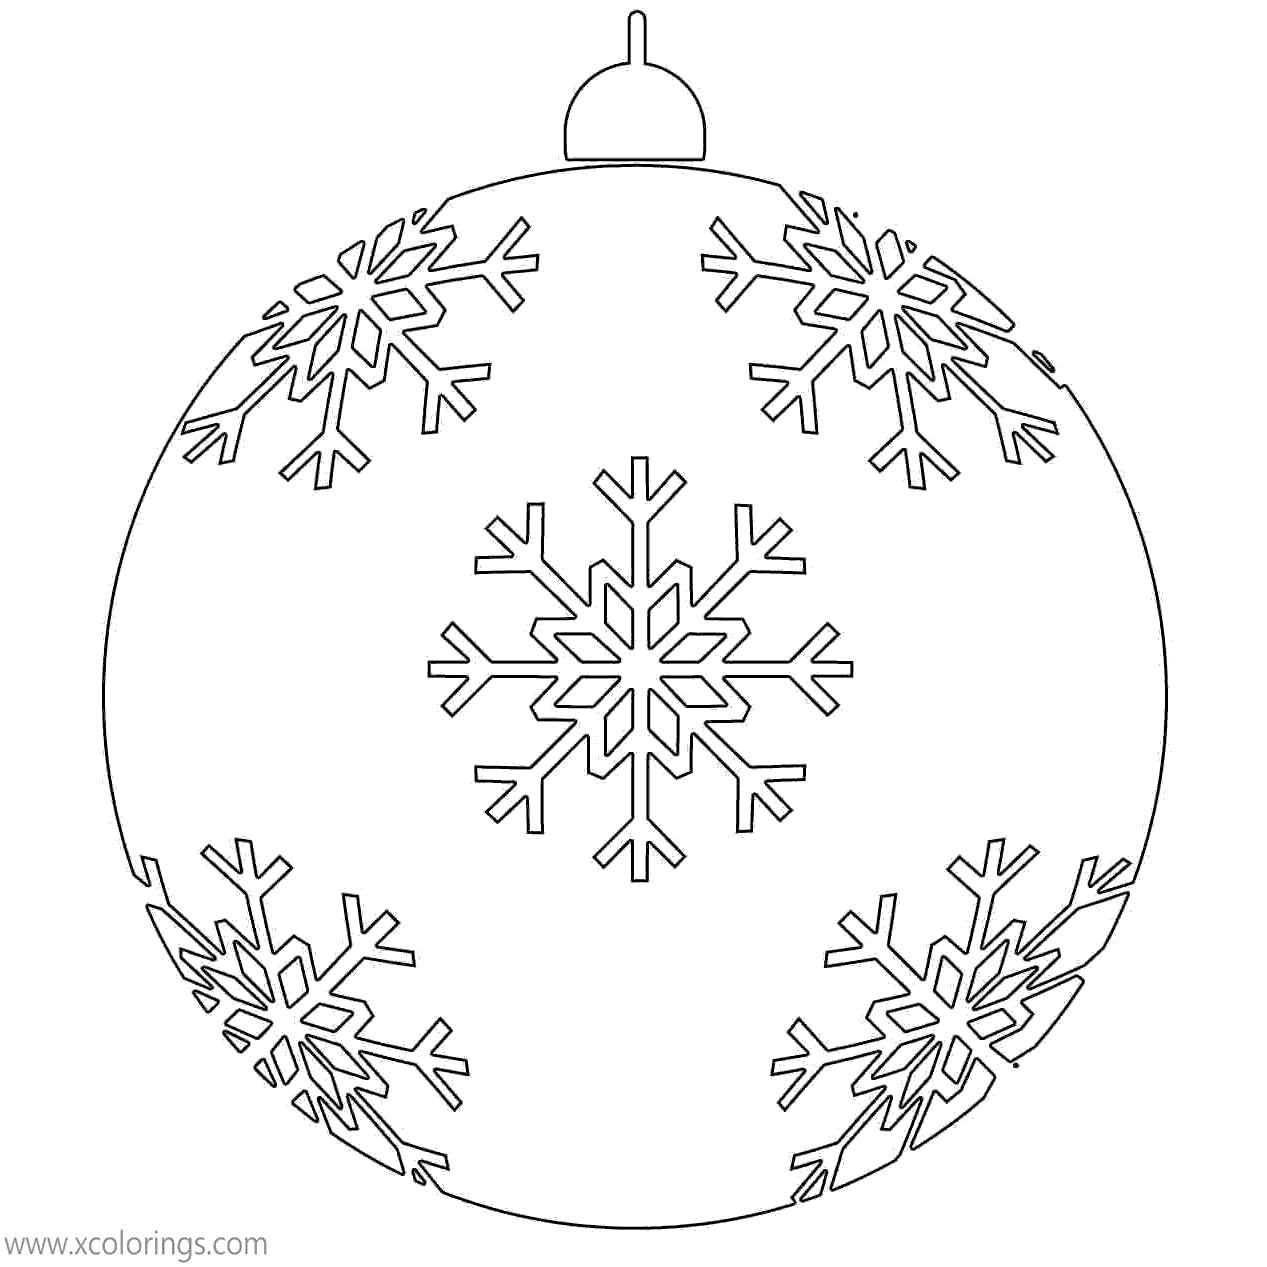 Free Christmas Ornament with Snowflakes Coloring Pages printable